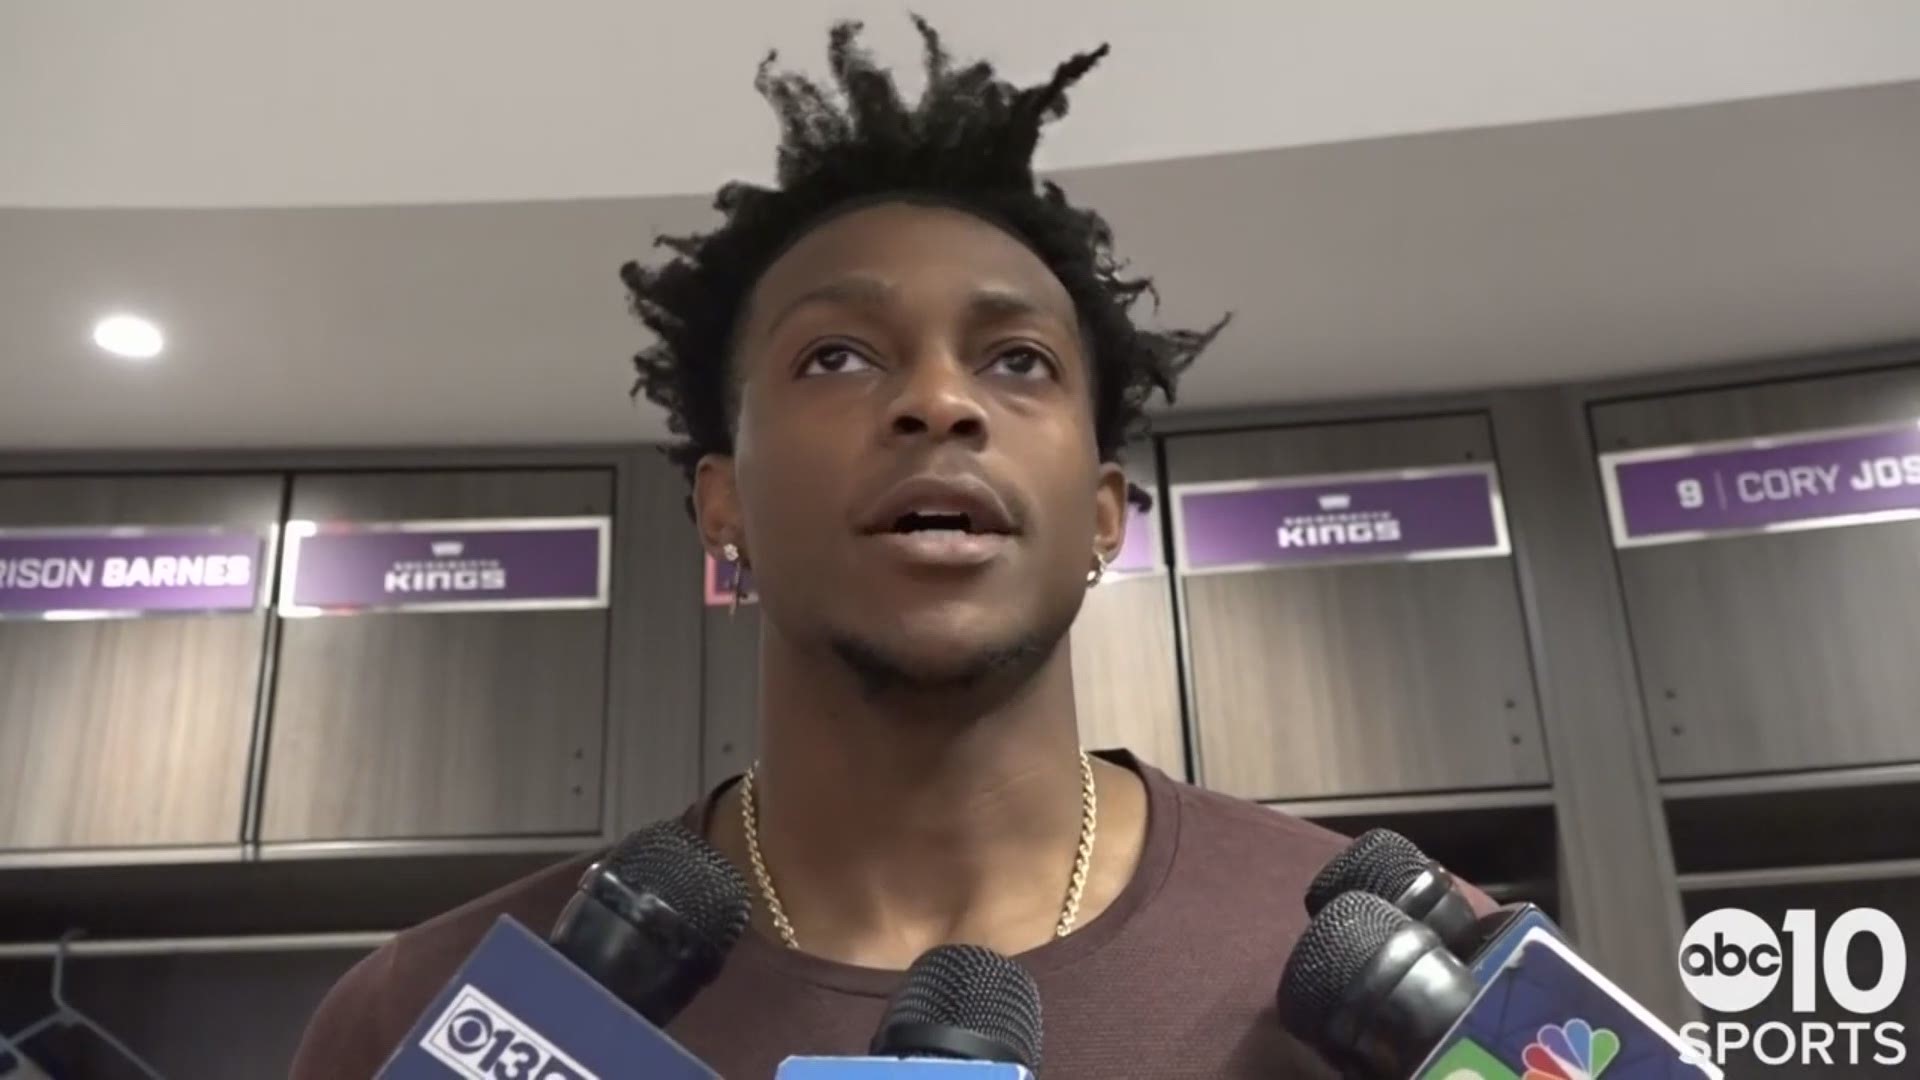 De'Aaron Fox discusses improving the Kings' pace of play and the sense of urgency after Sacramento dropped their 8th straight, in Tuesday's loss to the LA Clippers.